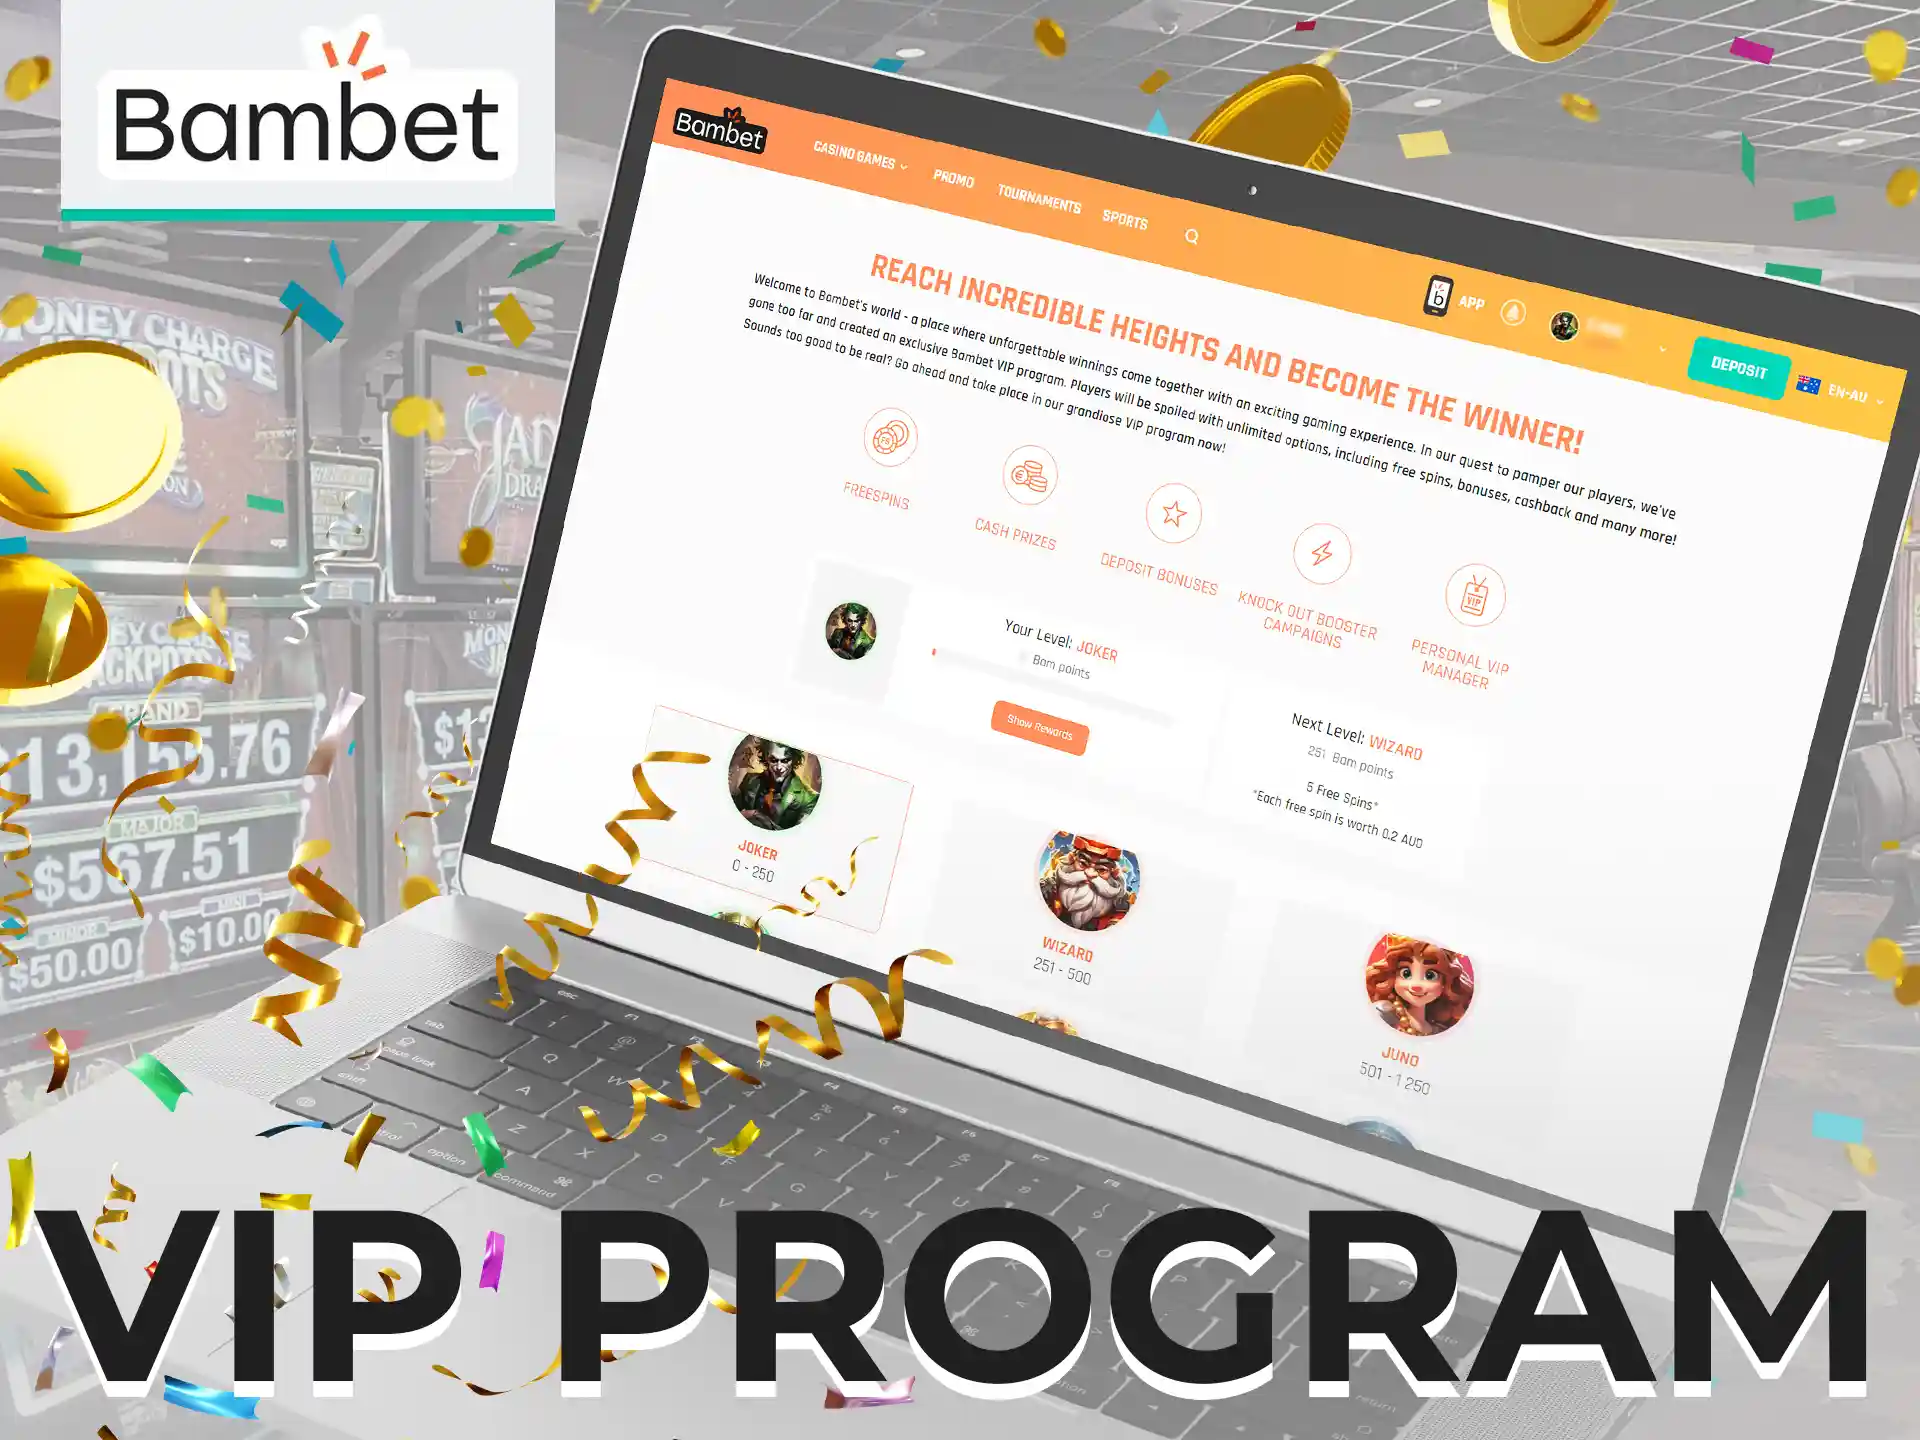 You will automatically become a member of the VIP program after registration.